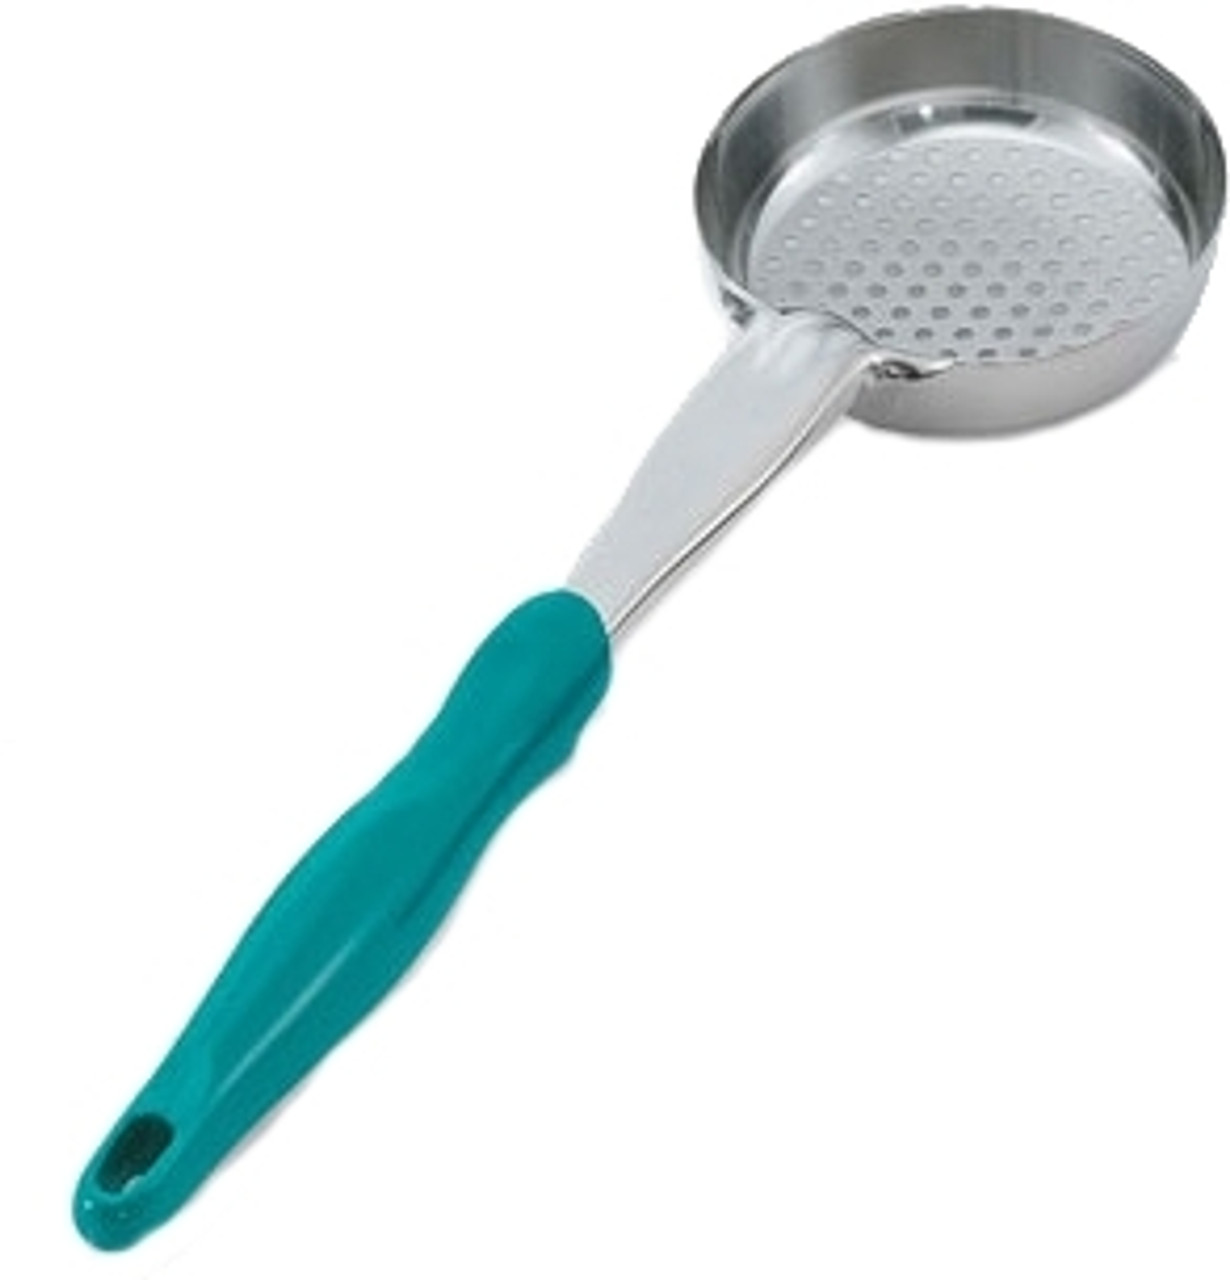 Vollrath 6432655 6 Oz. Spoodle - Perforated w/ Teal Handle